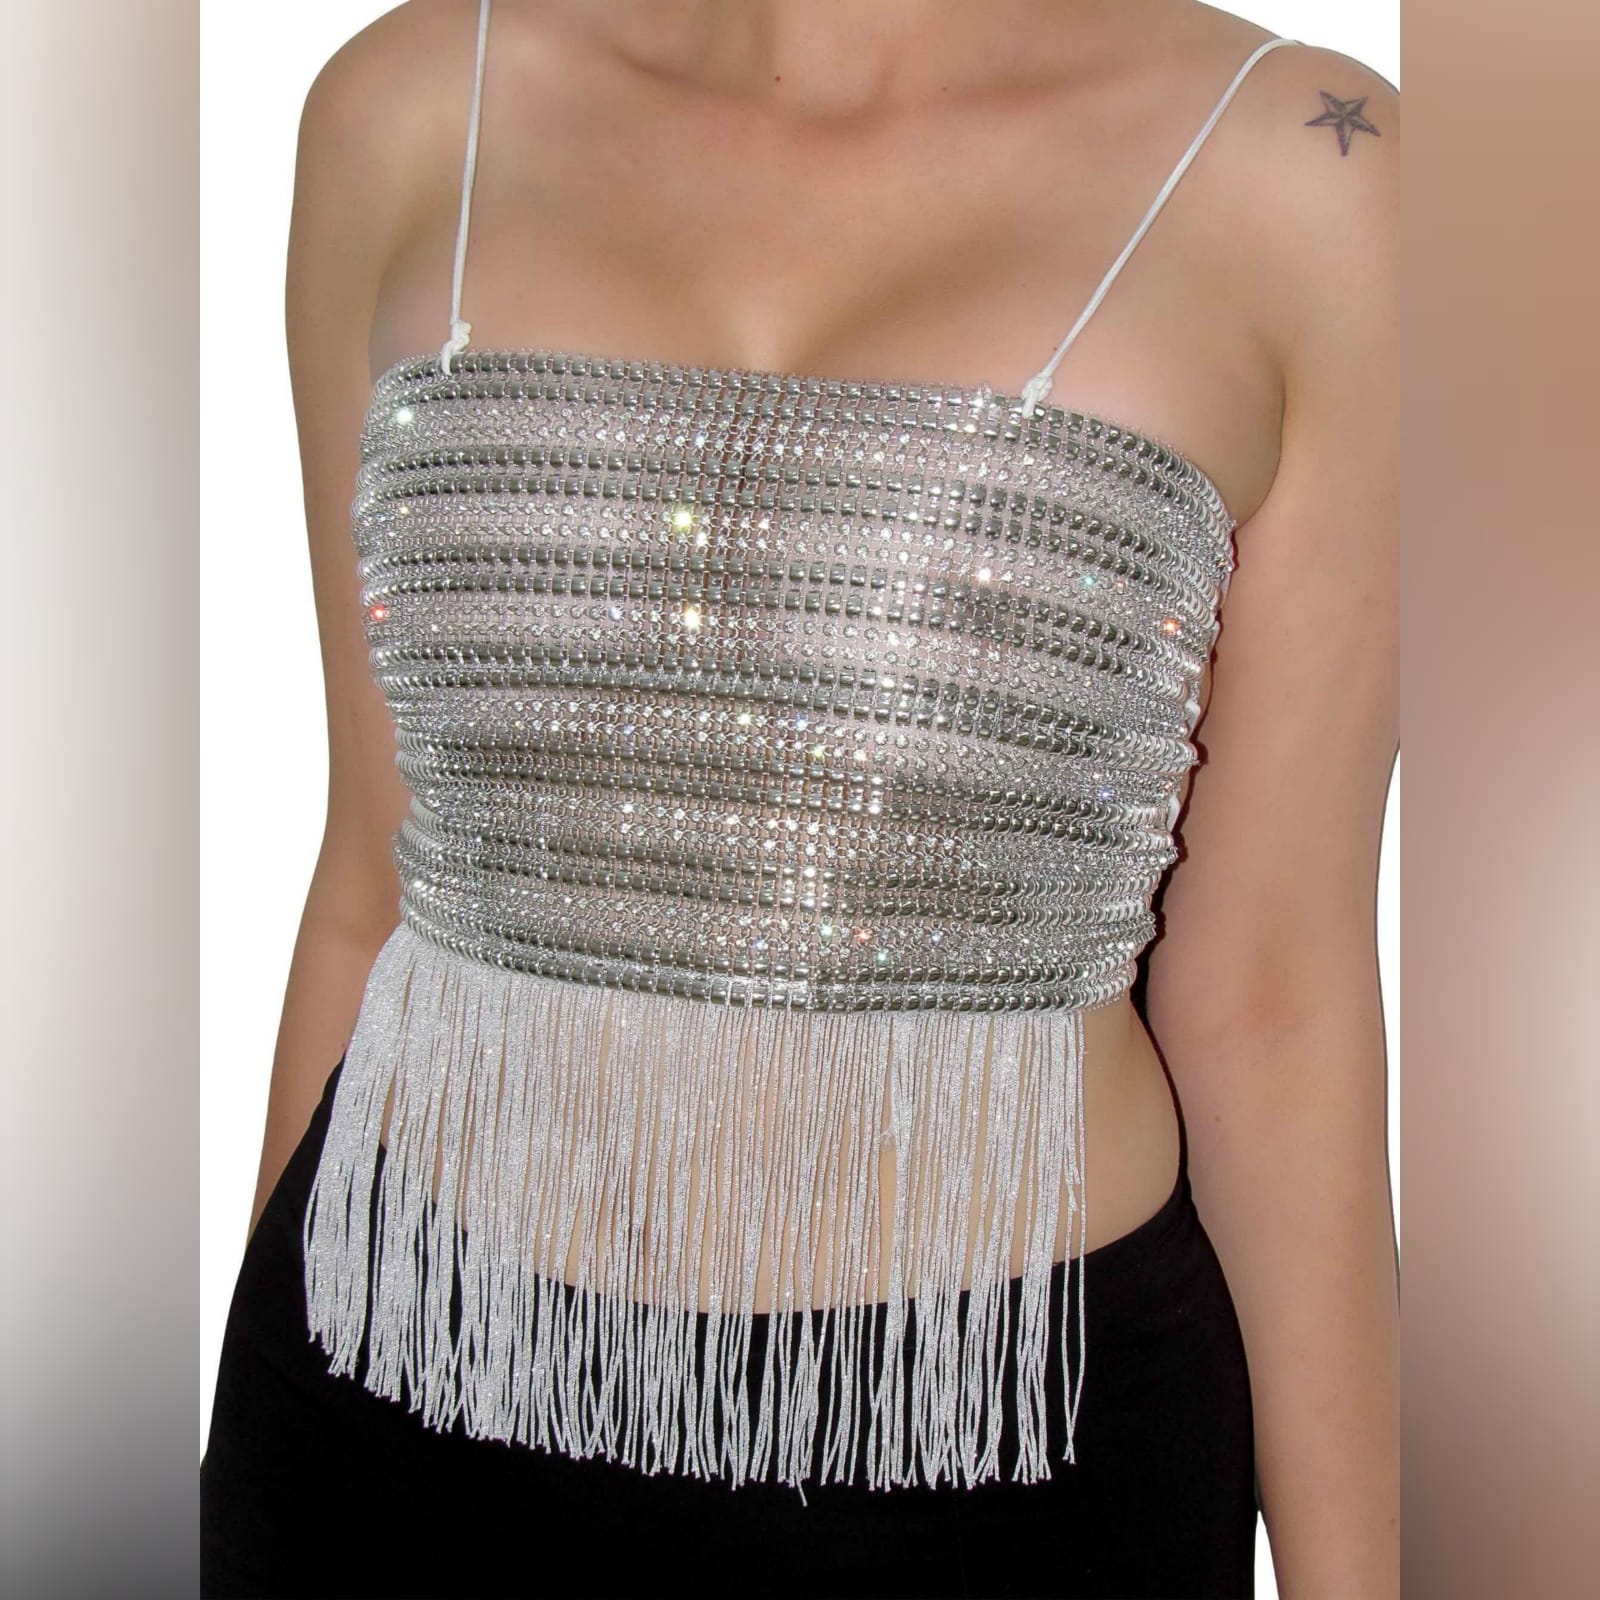 Silver striped diamante top 4 silver striped diamante top, a one of a kind. Handmade crop top with a fun tassel hemline. This open-back top has an elasticated white rope to create a lace-up, also helps to adjust to fit.